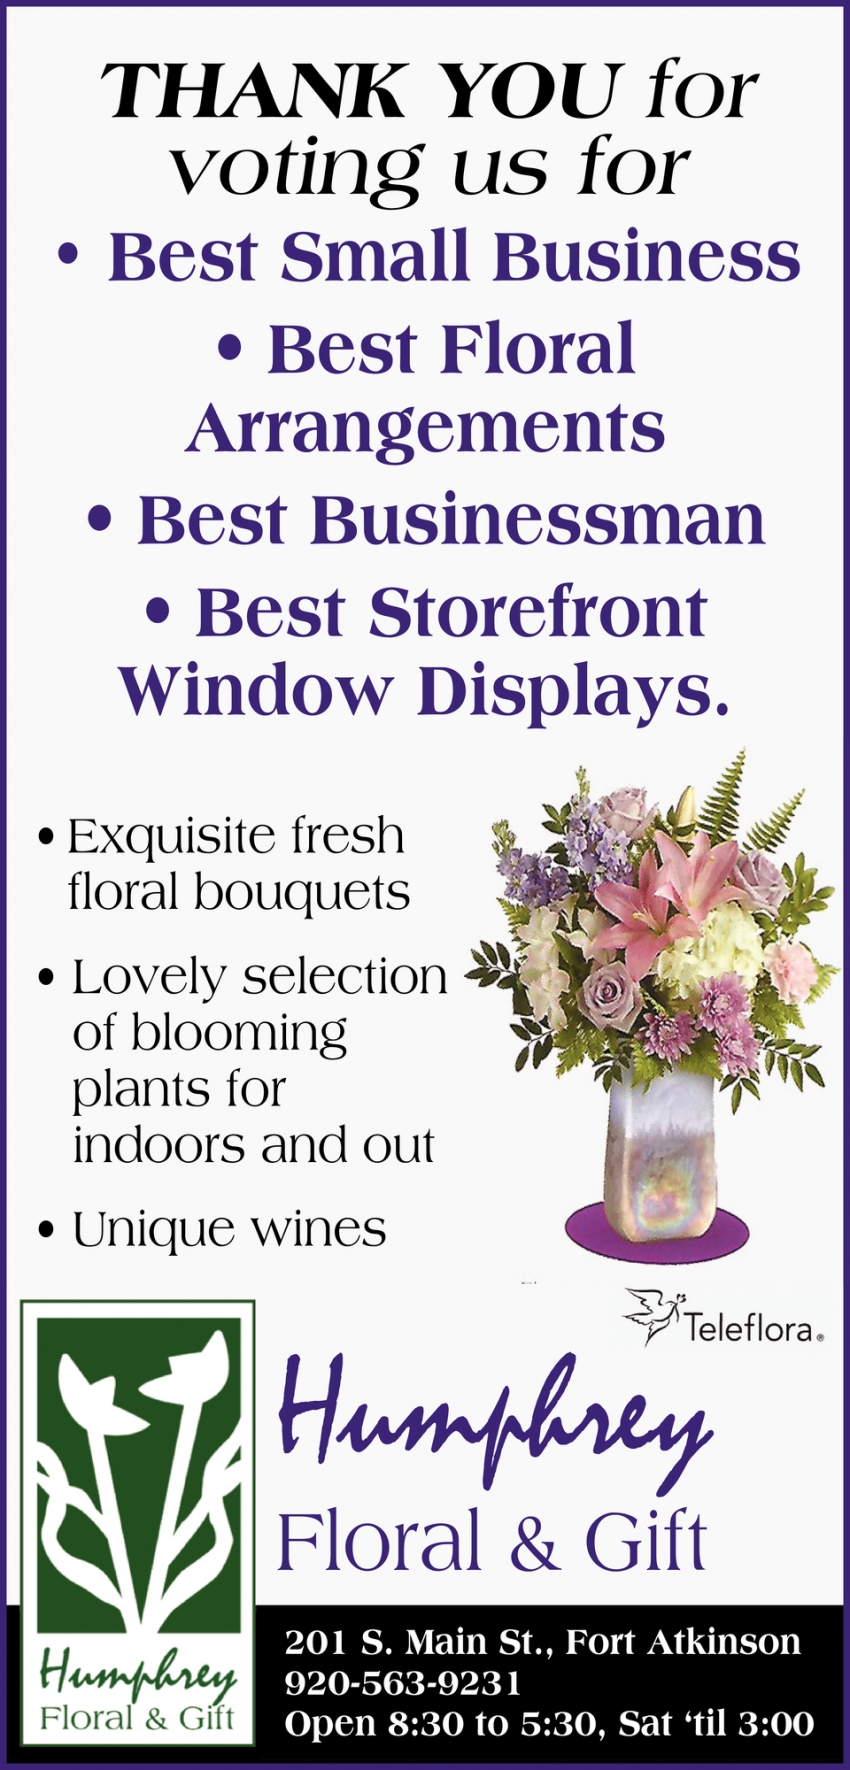 Thank You for Voting Us for Best Small Business